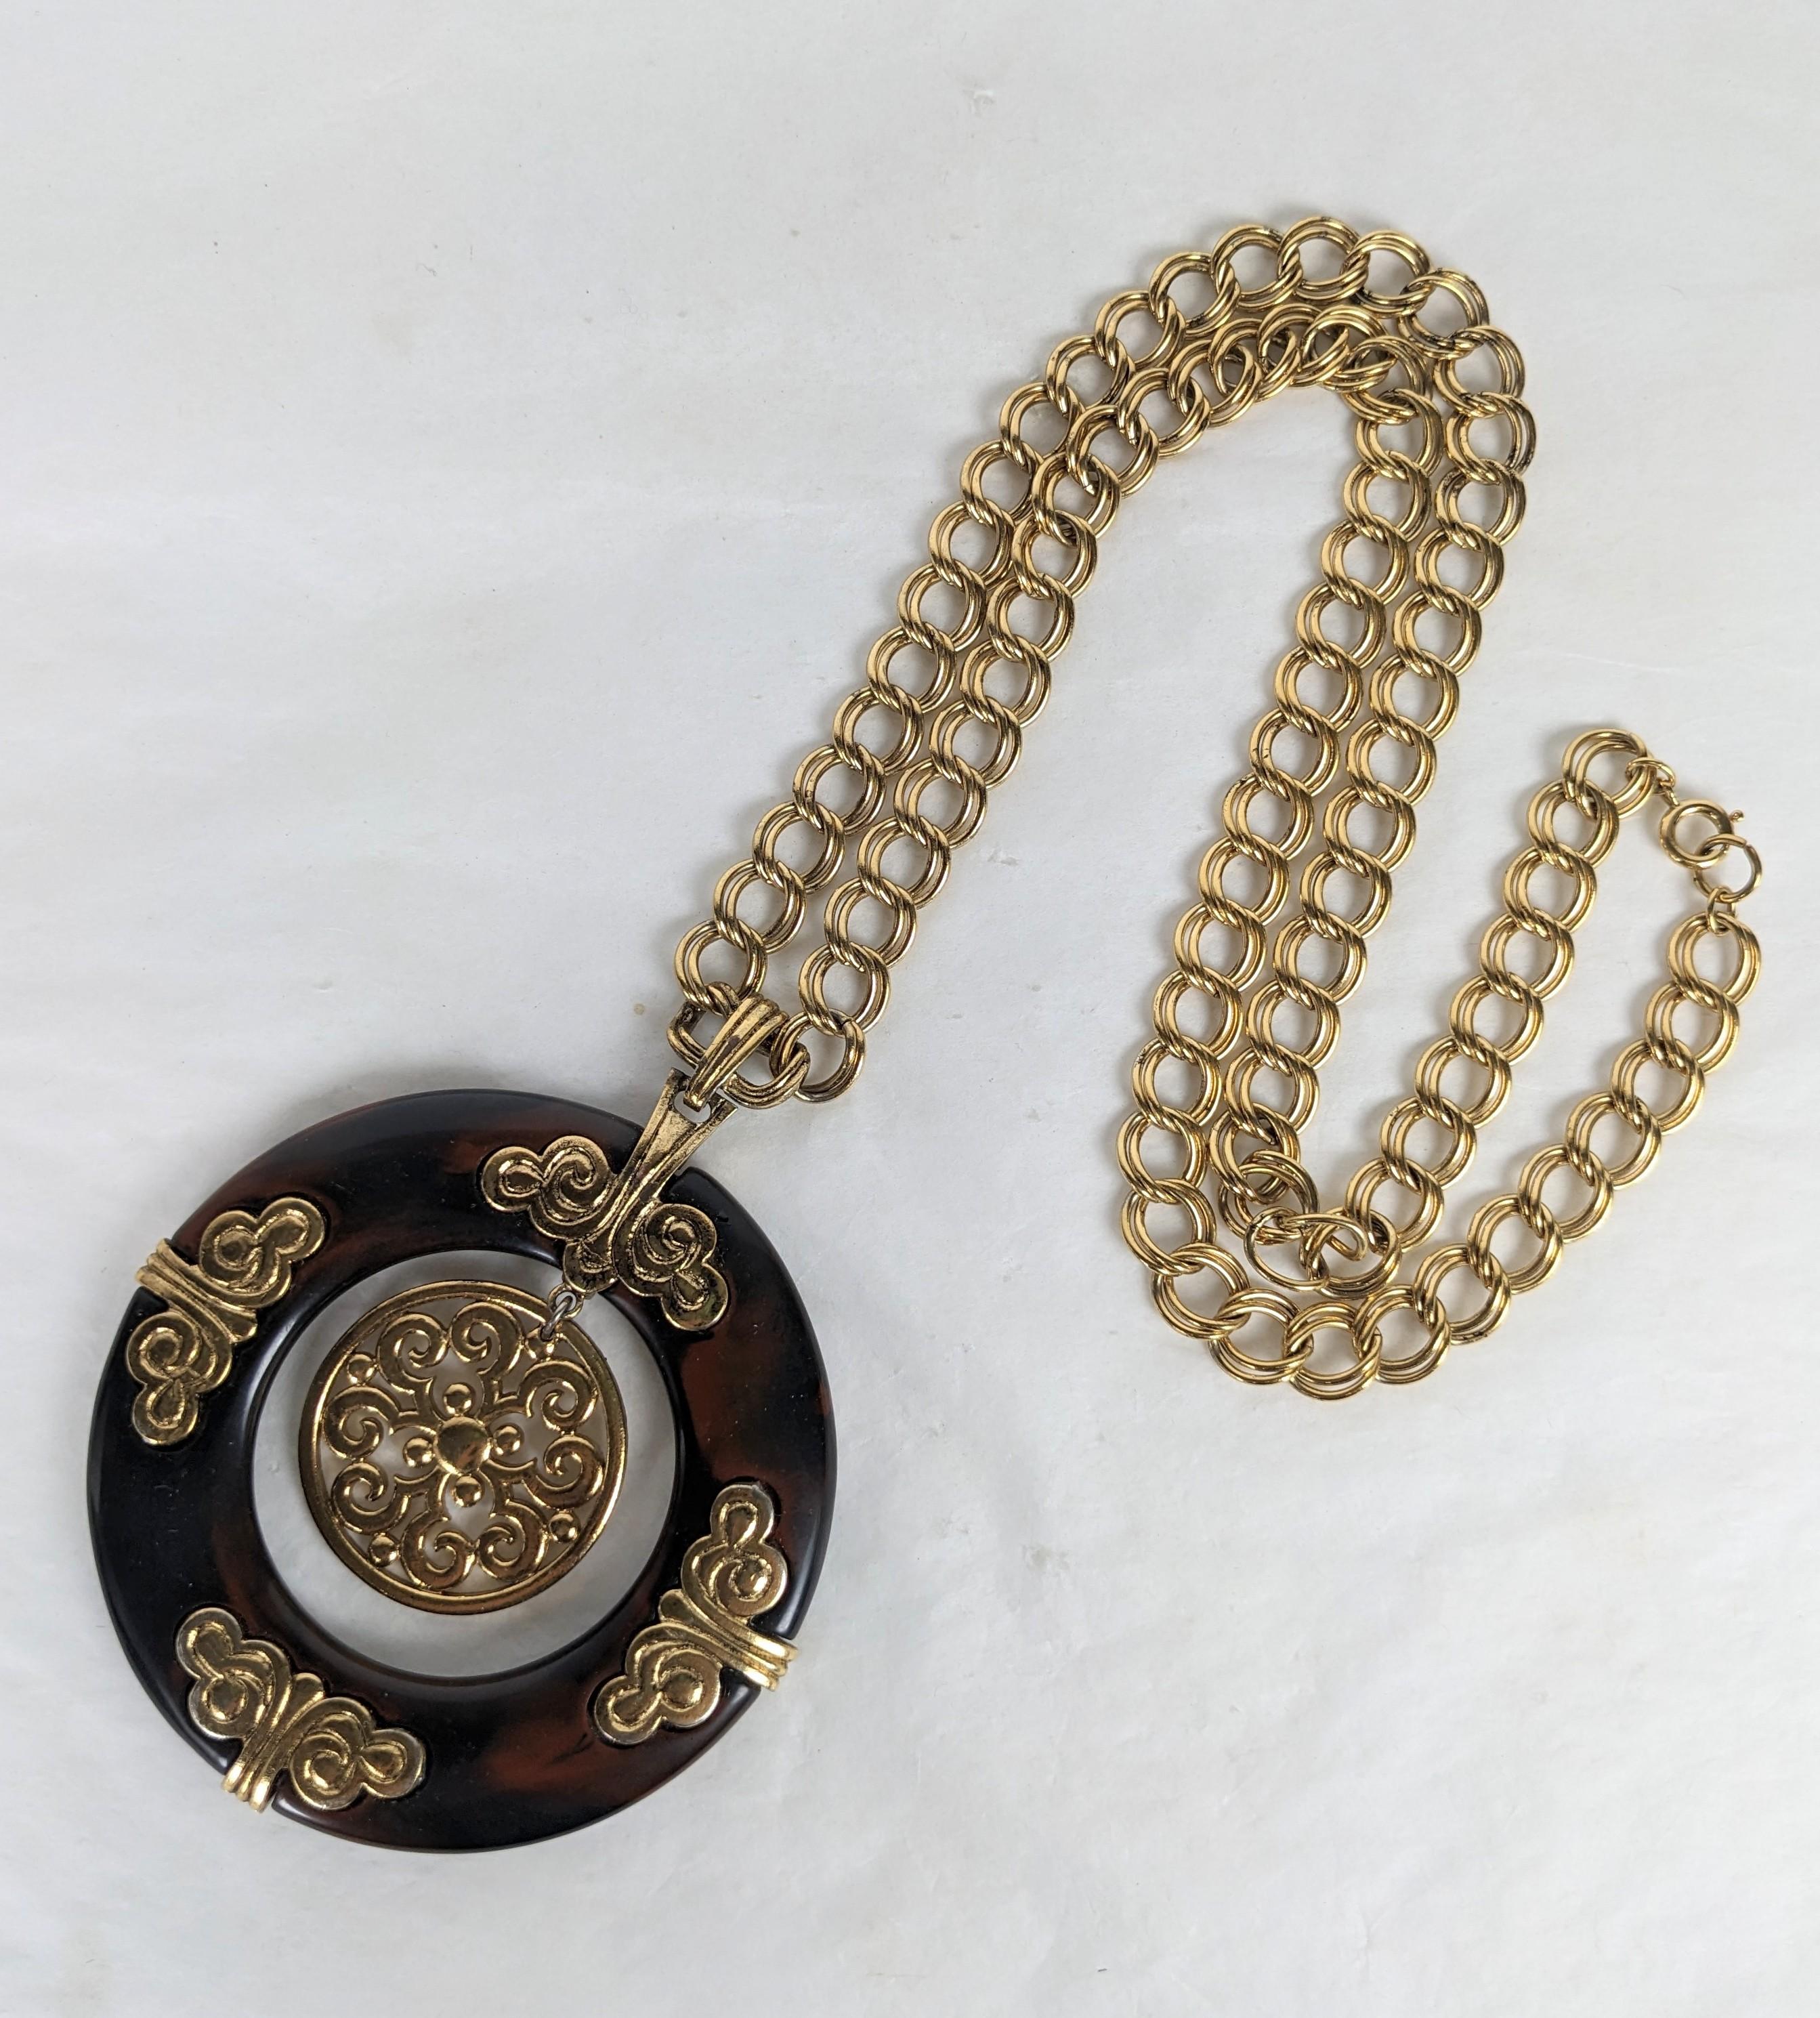 Striking and elegant Trifari Faux Tortoise Mod Pendant Necklace with slightly Asian overtones. A large bakelite ring made to resemble faux torrtoise is set with golden cloud motifs and a central gold circular motif. Chunky gilt curb link chain.